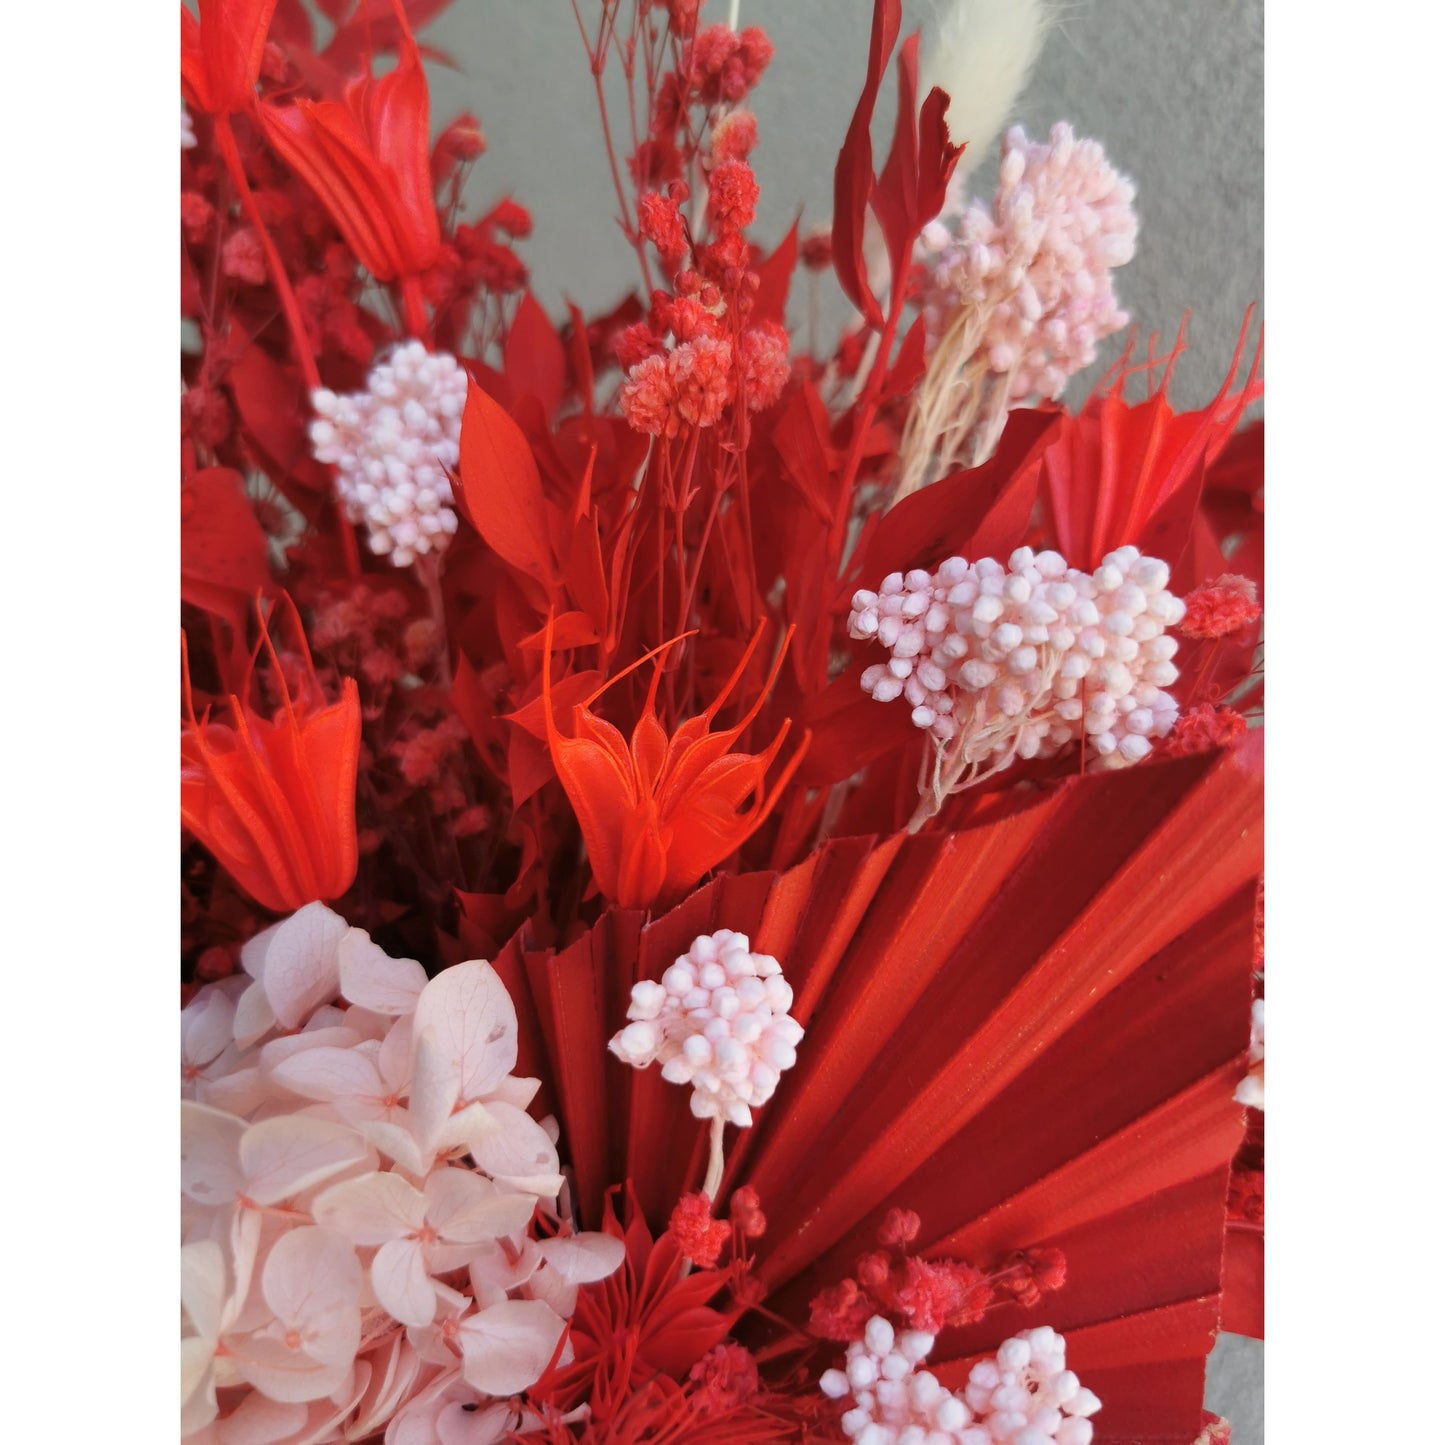 Bunch of Dried & Preserved flowers in red & pink colours and sitting in a frosted glass vase. Photo shows a close up of the flowers